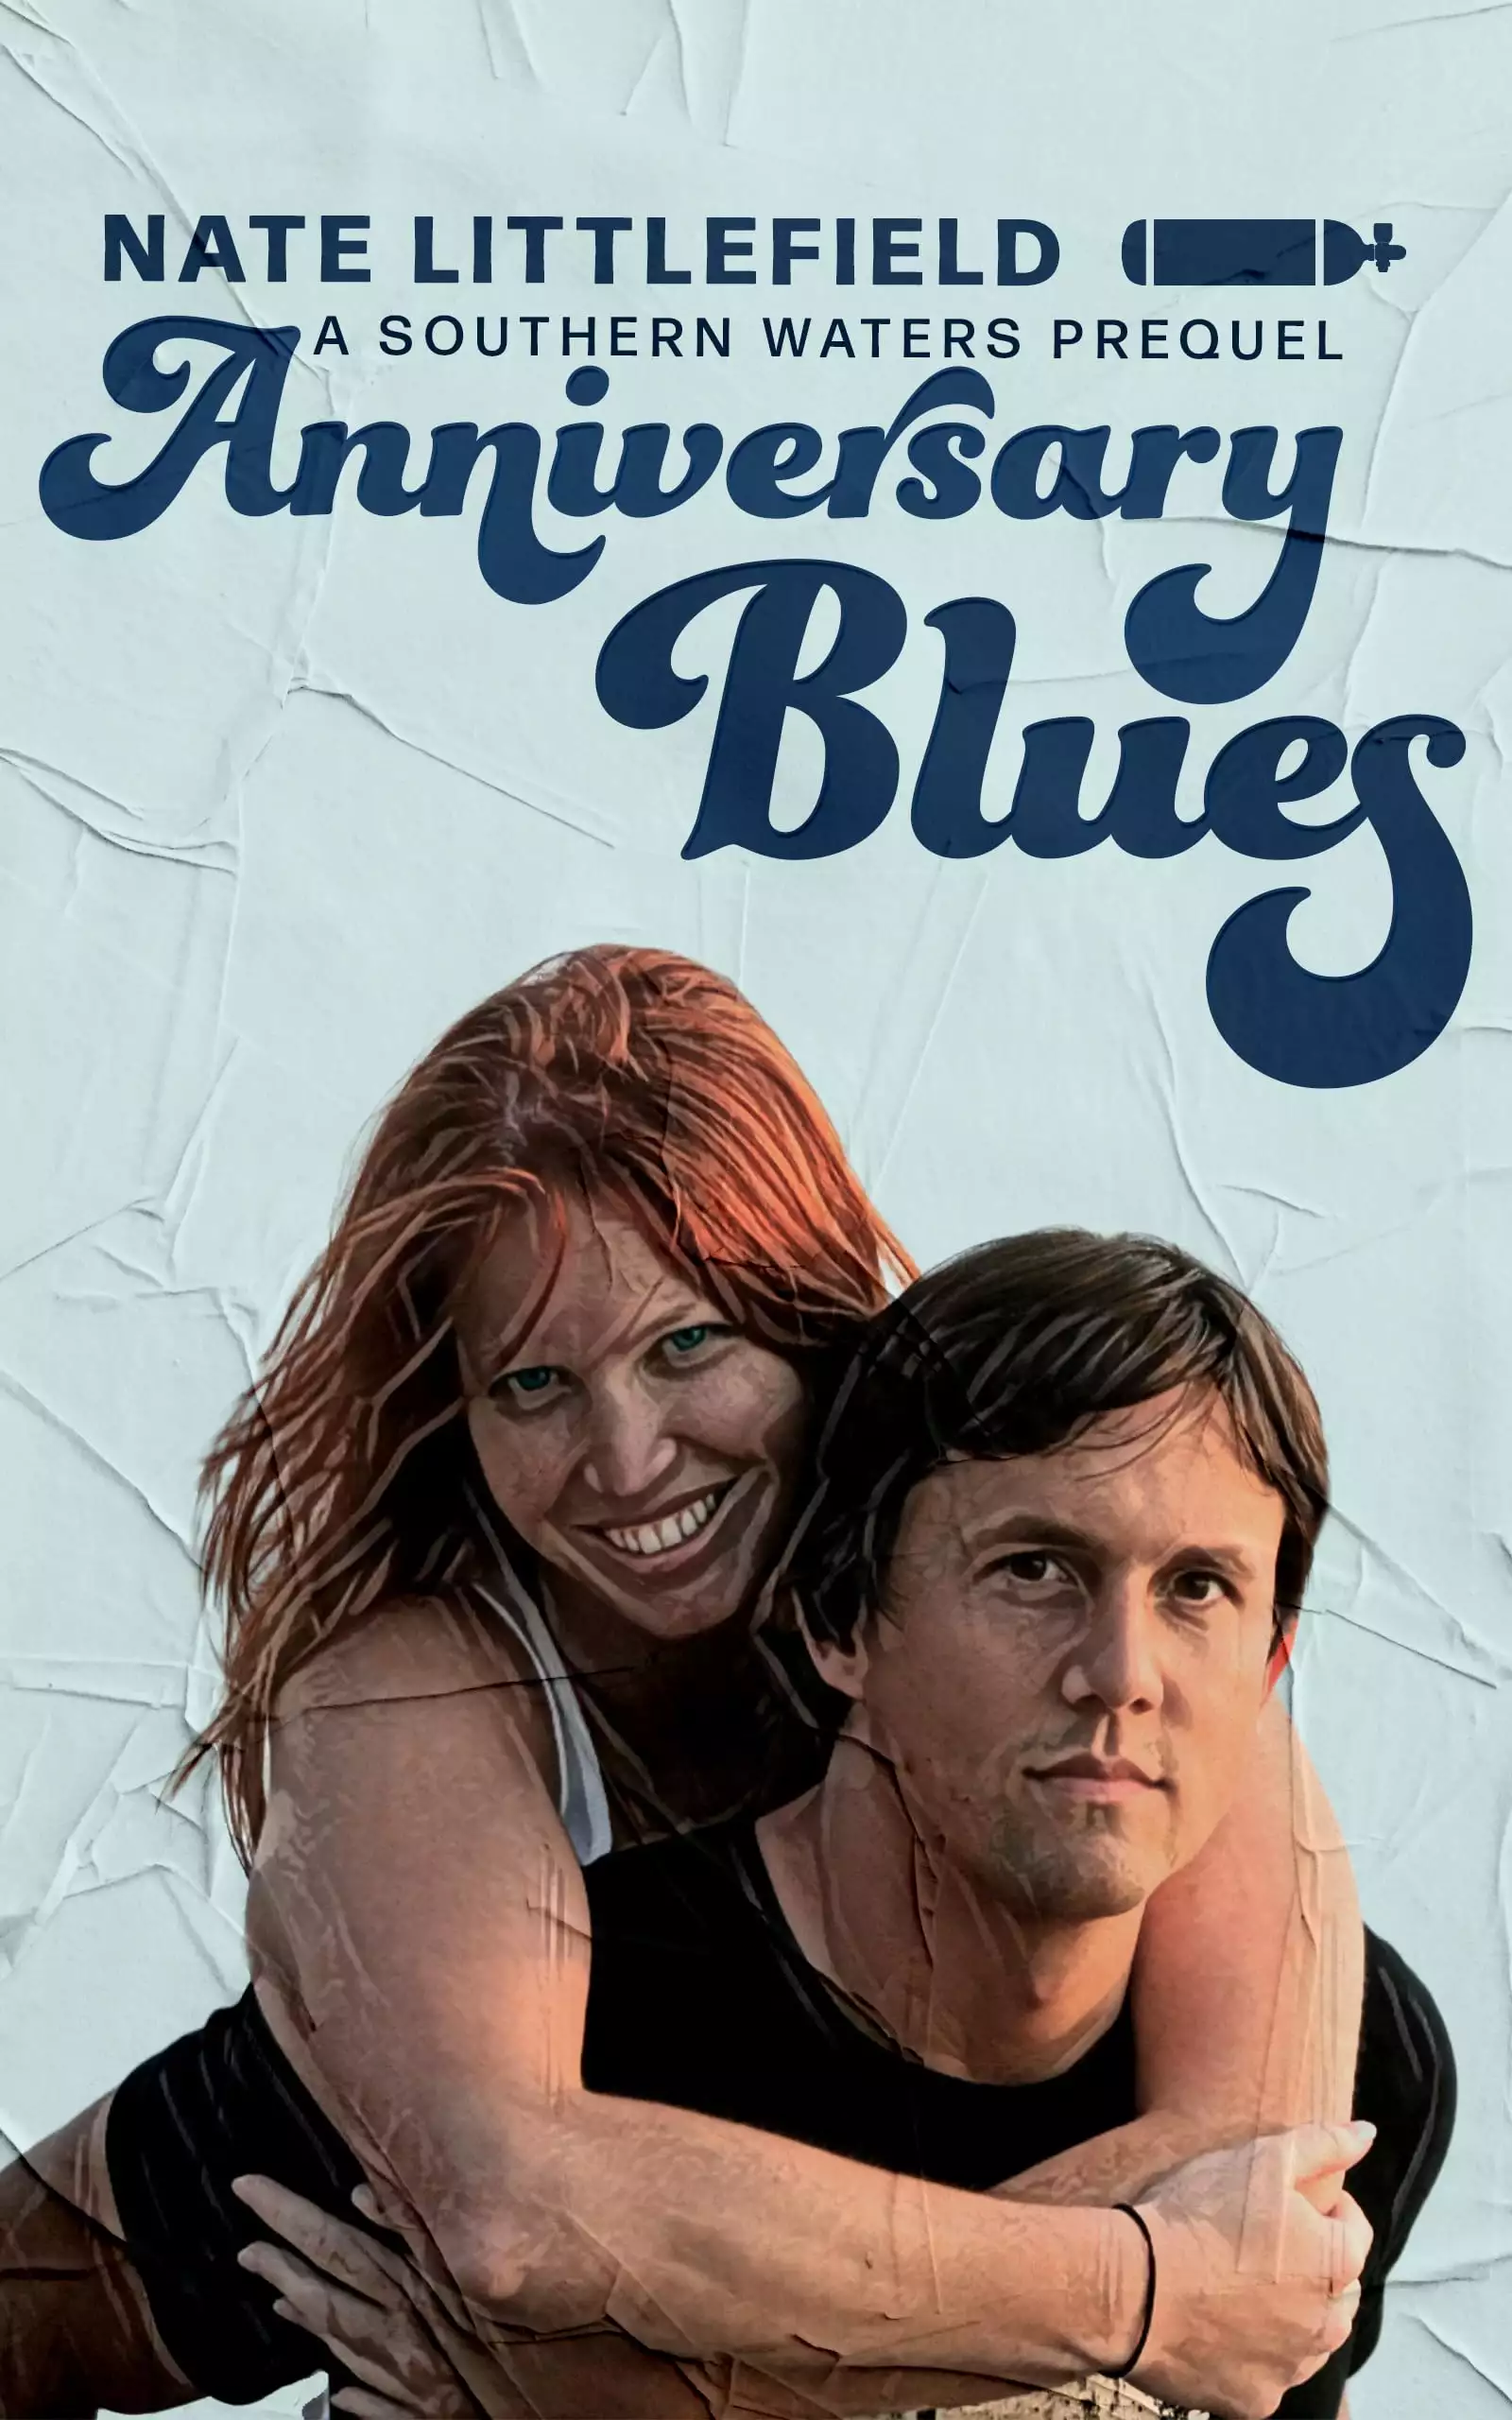 Anniversary Blues: A Southern Waters prequel short story featuring Rex & Rose Fisher